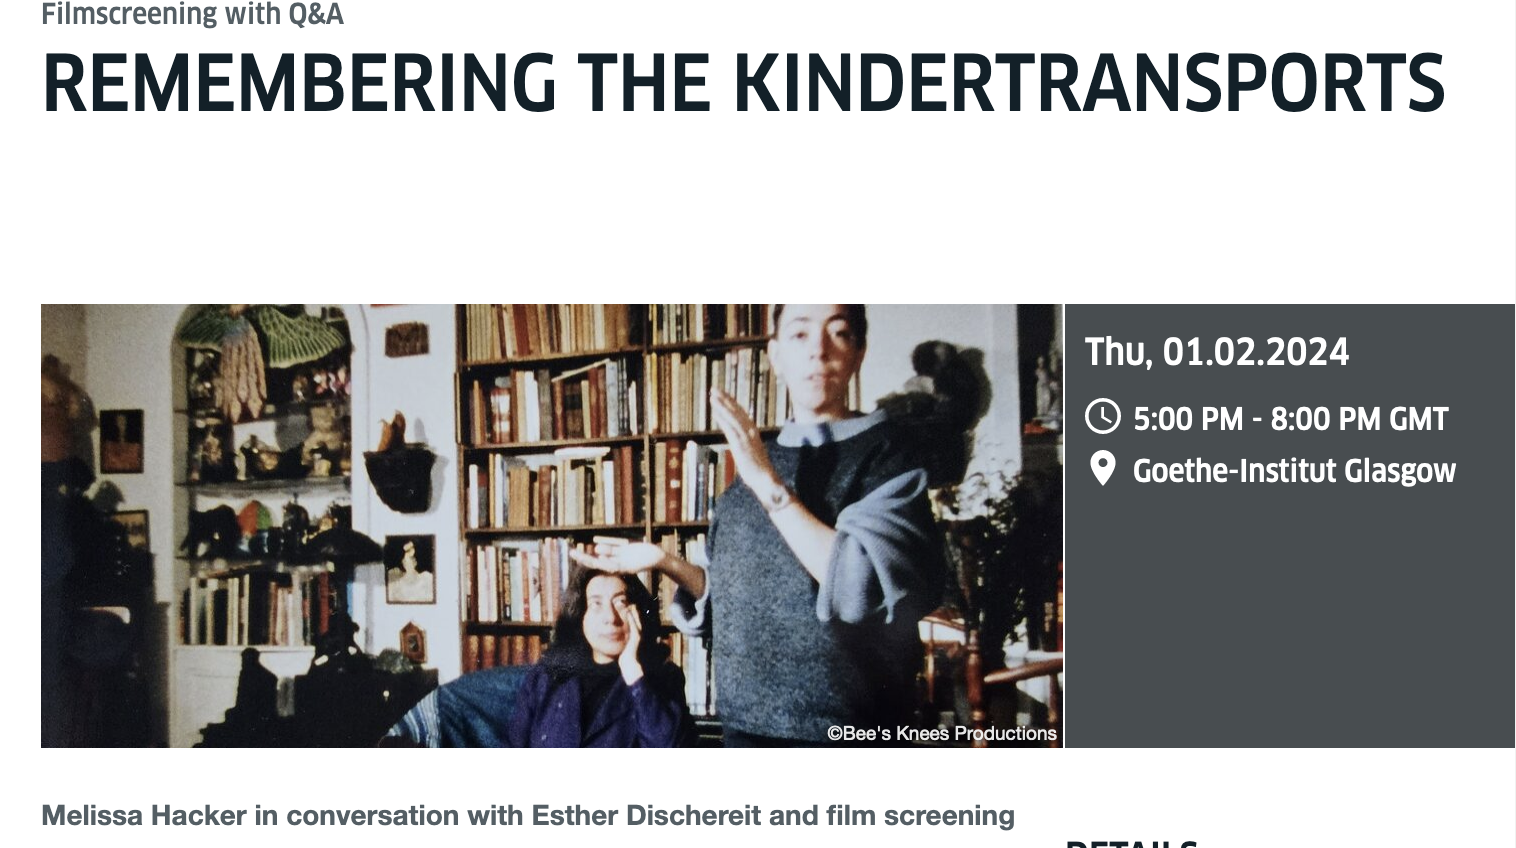 Remembering the Kindertransports Film Screening and Discussion at the Goethe Institute, Glasgow